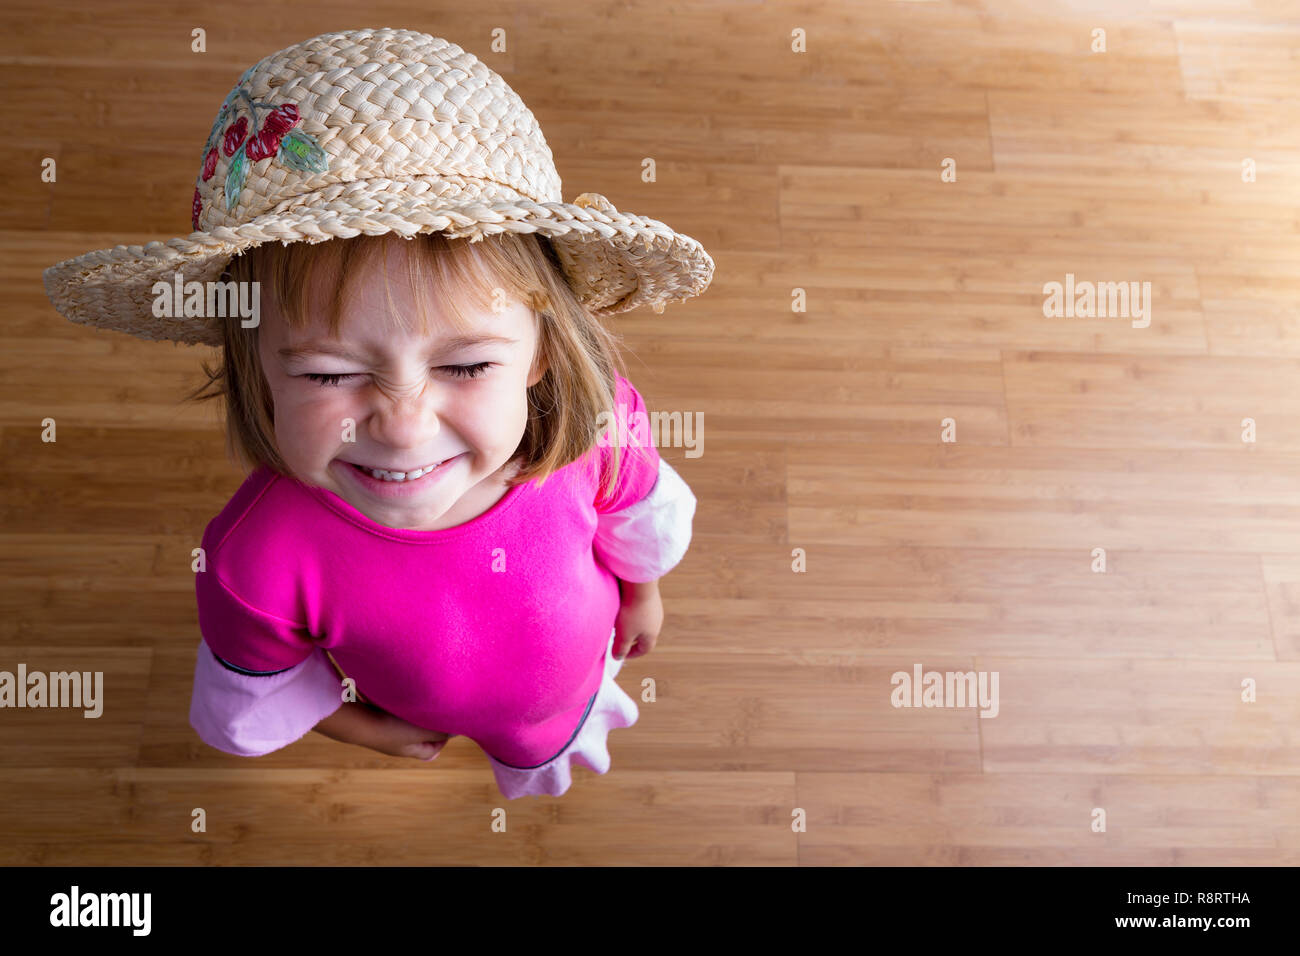 Young girl in straw hat and pink dress, standing on wooden parquet floor and squinting at camera, viewed from above with copy space Stock Photo